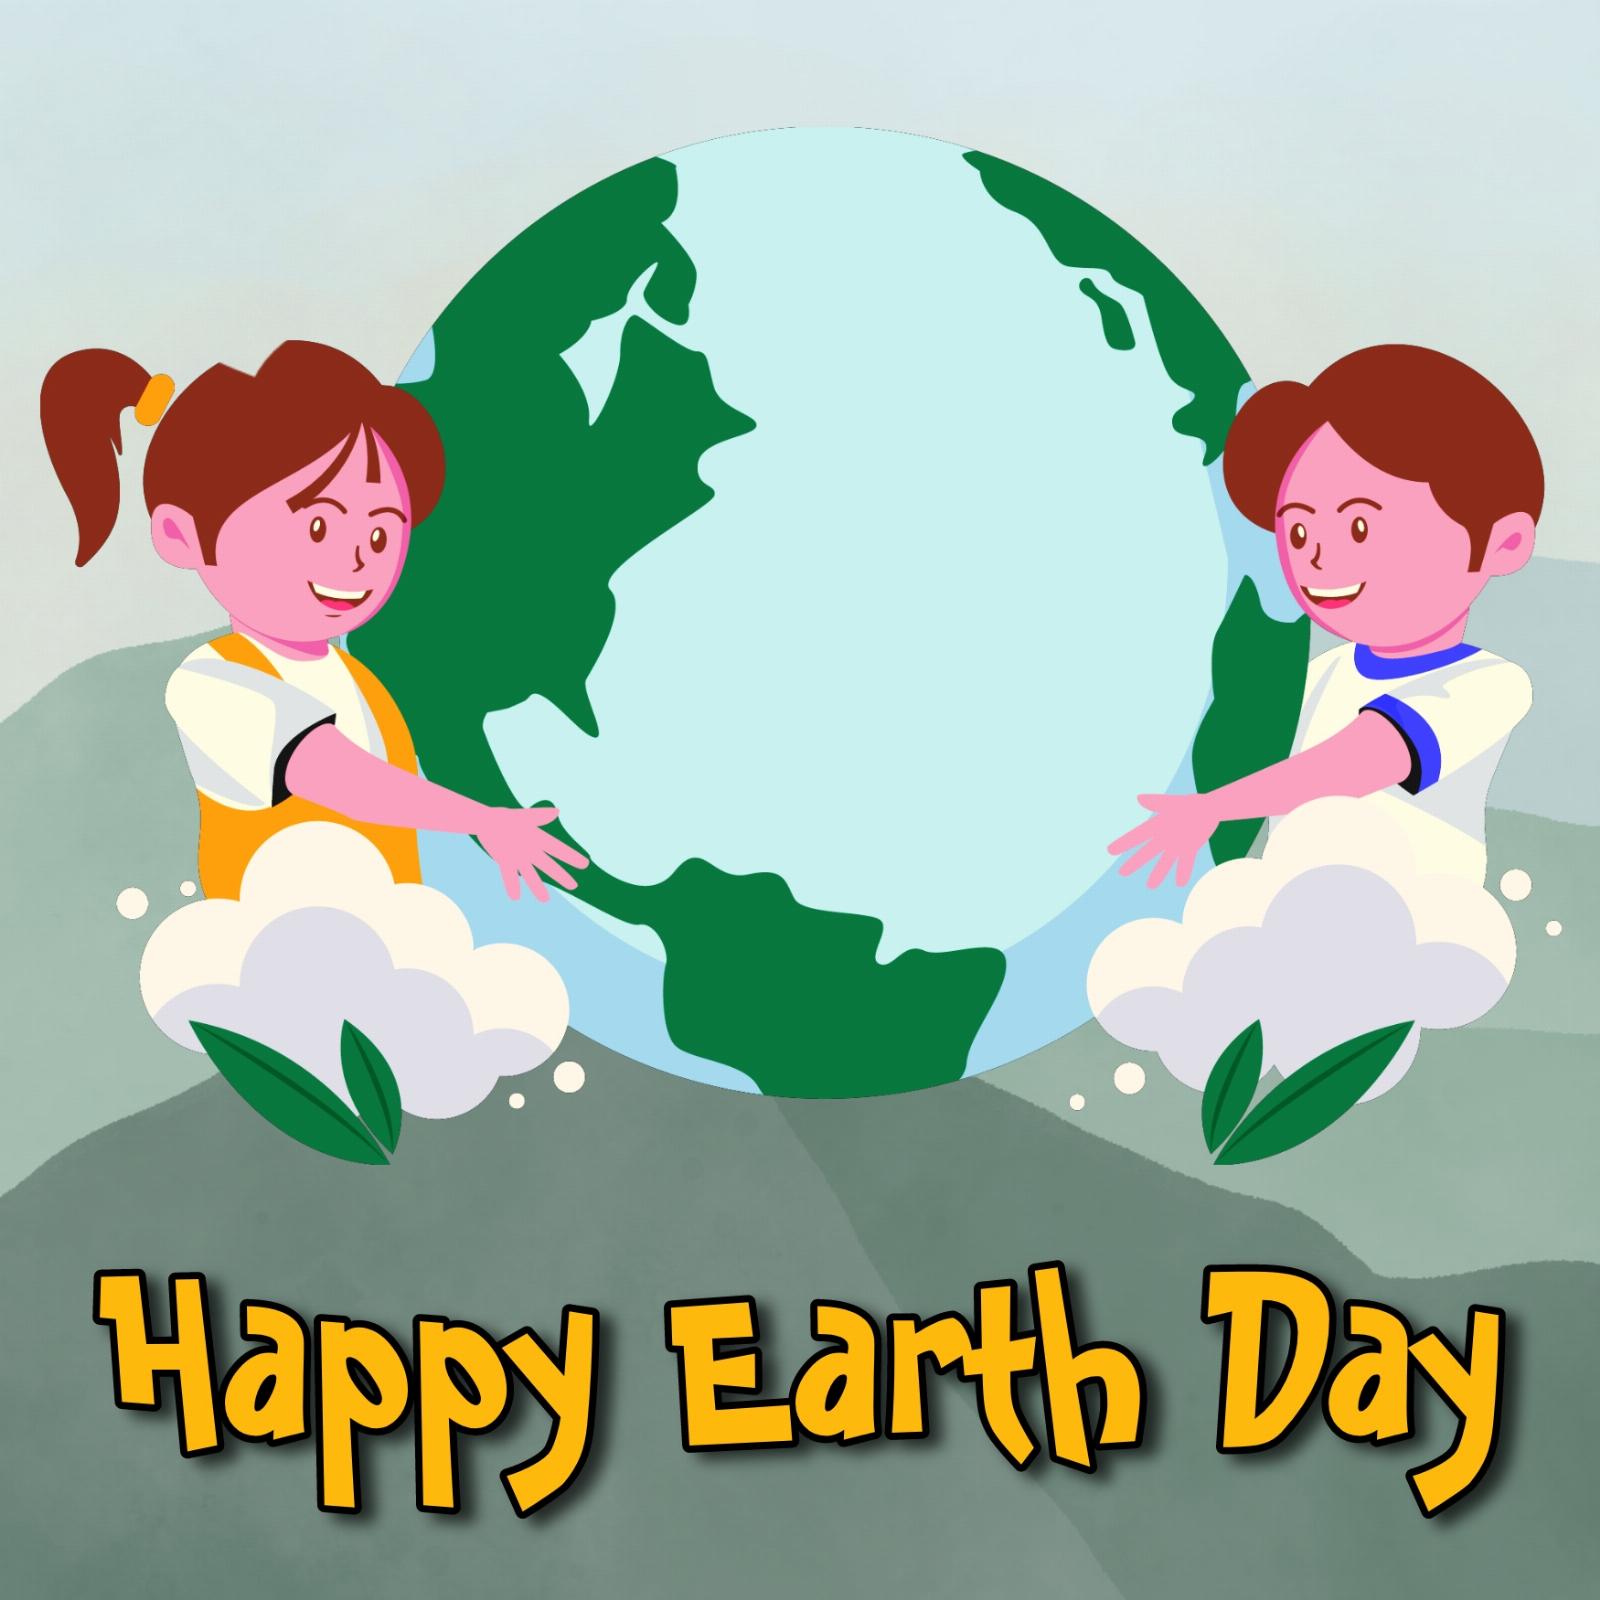 Happy Earth Day Kids Images